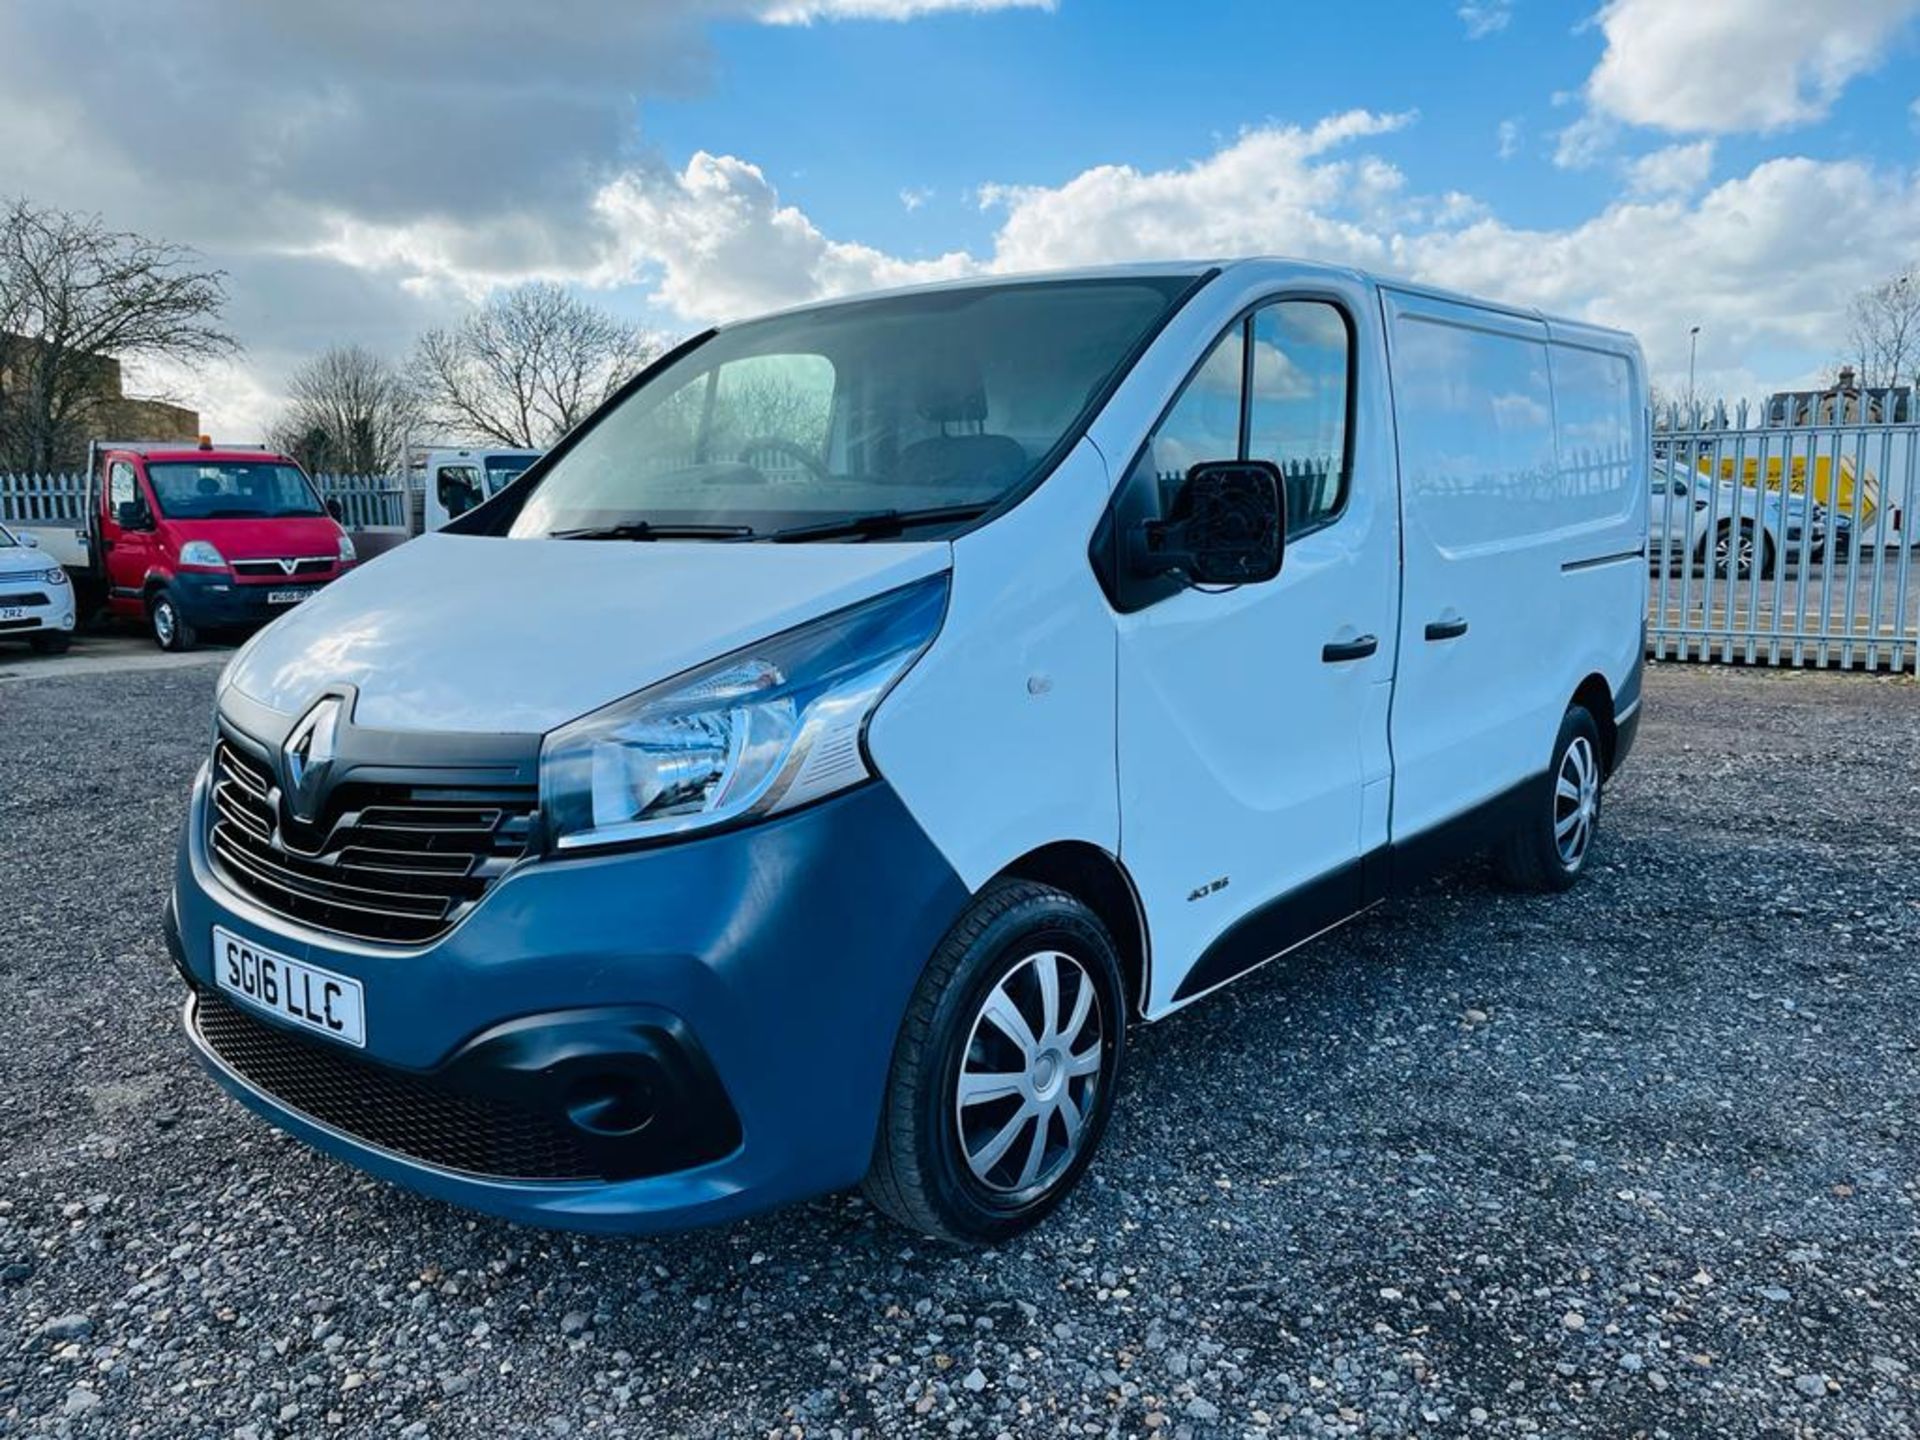 ** ON SALE ** Renault Trafic SL27 Business + 1.6 DCI 115 L1 H1 2016 '16 Reg' -A/C- Only 69794 Miles - Image 3 of 25